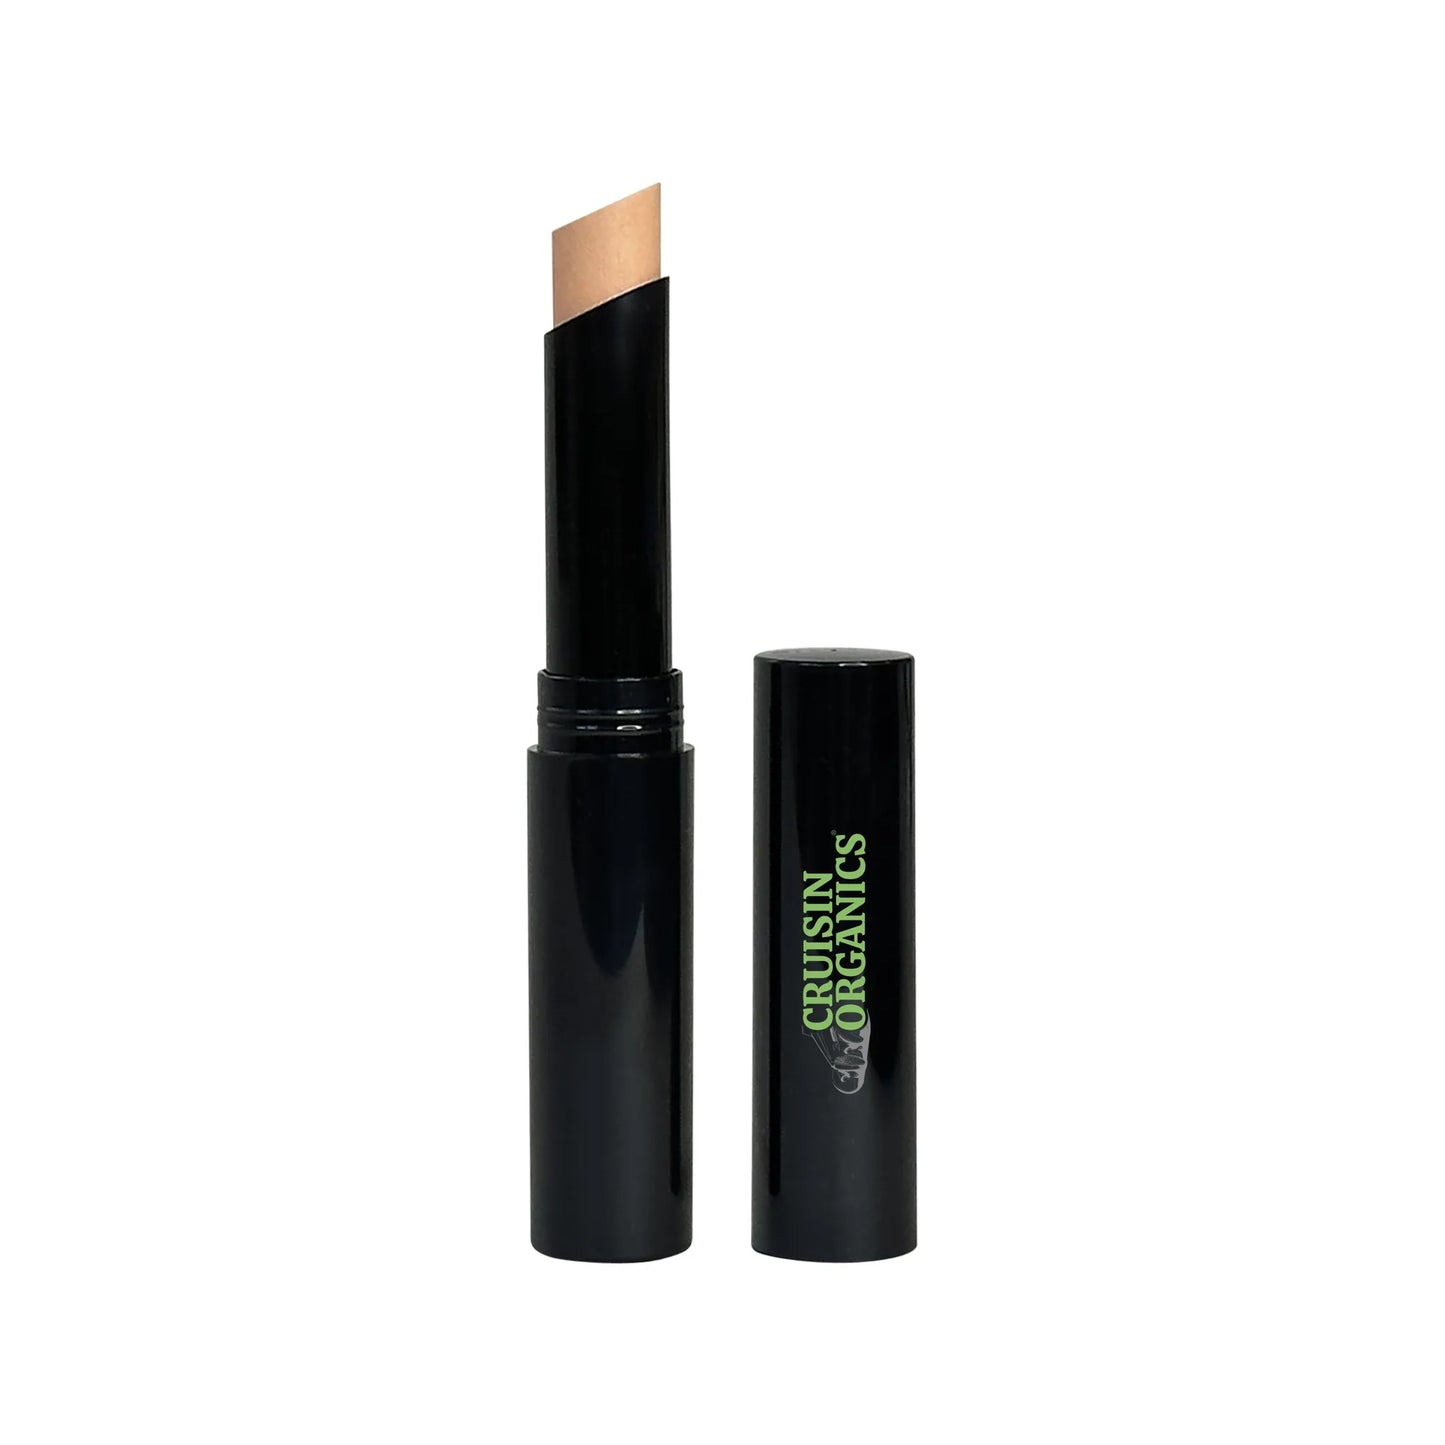 Cruisin Organics Beige Creme Concealer Stick is oh so creamy, and surprisingly, dark skin is covered!